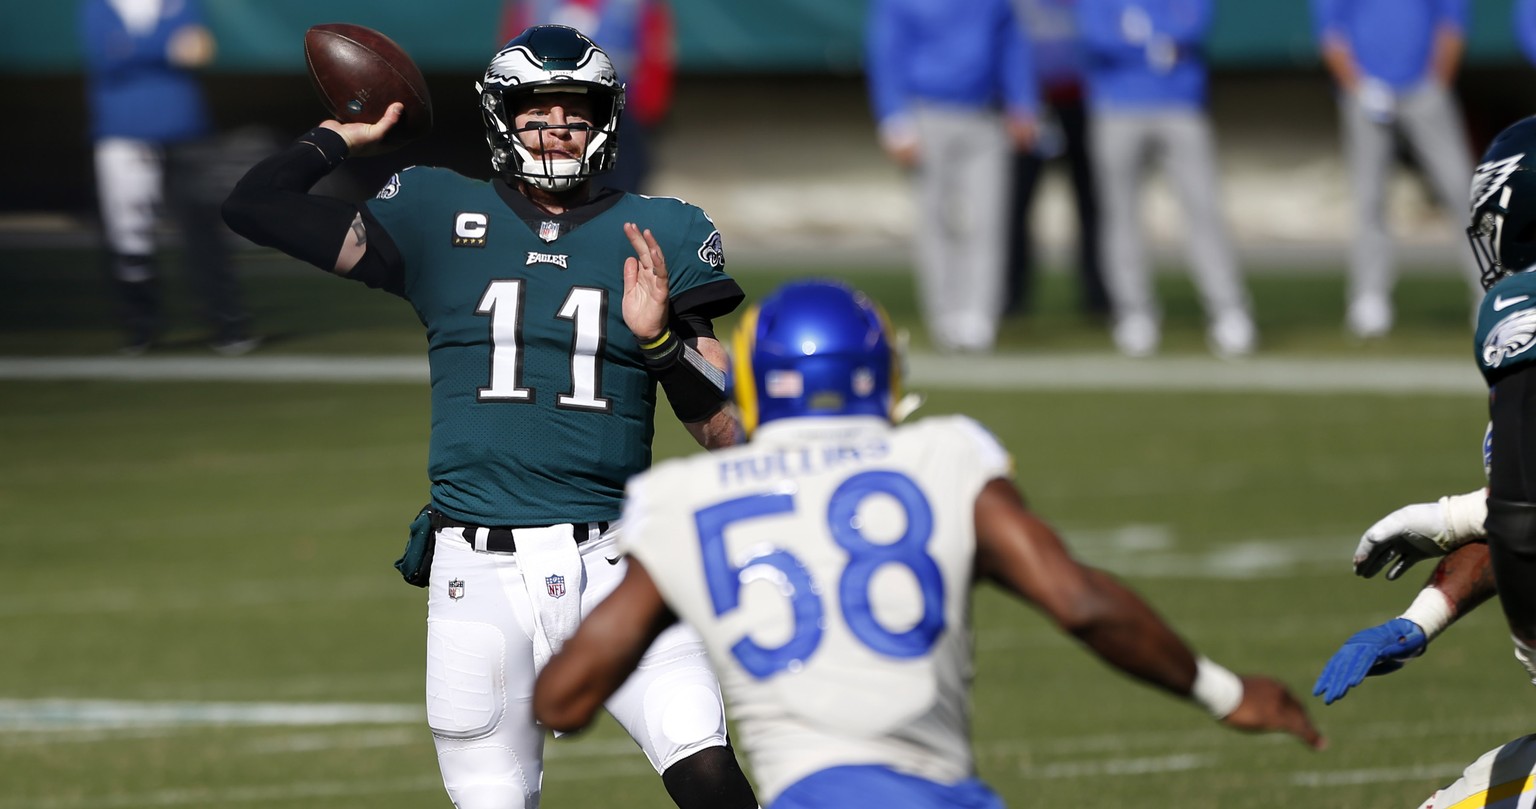 Philadelphia Eagles&#039; Carson Wentz plays during the second half of an NFL football game against the Los Angeles Rams, Sunday, Sept. 20, 2020, in Philadelphia. (AP Photo/Laurence Kesterson)